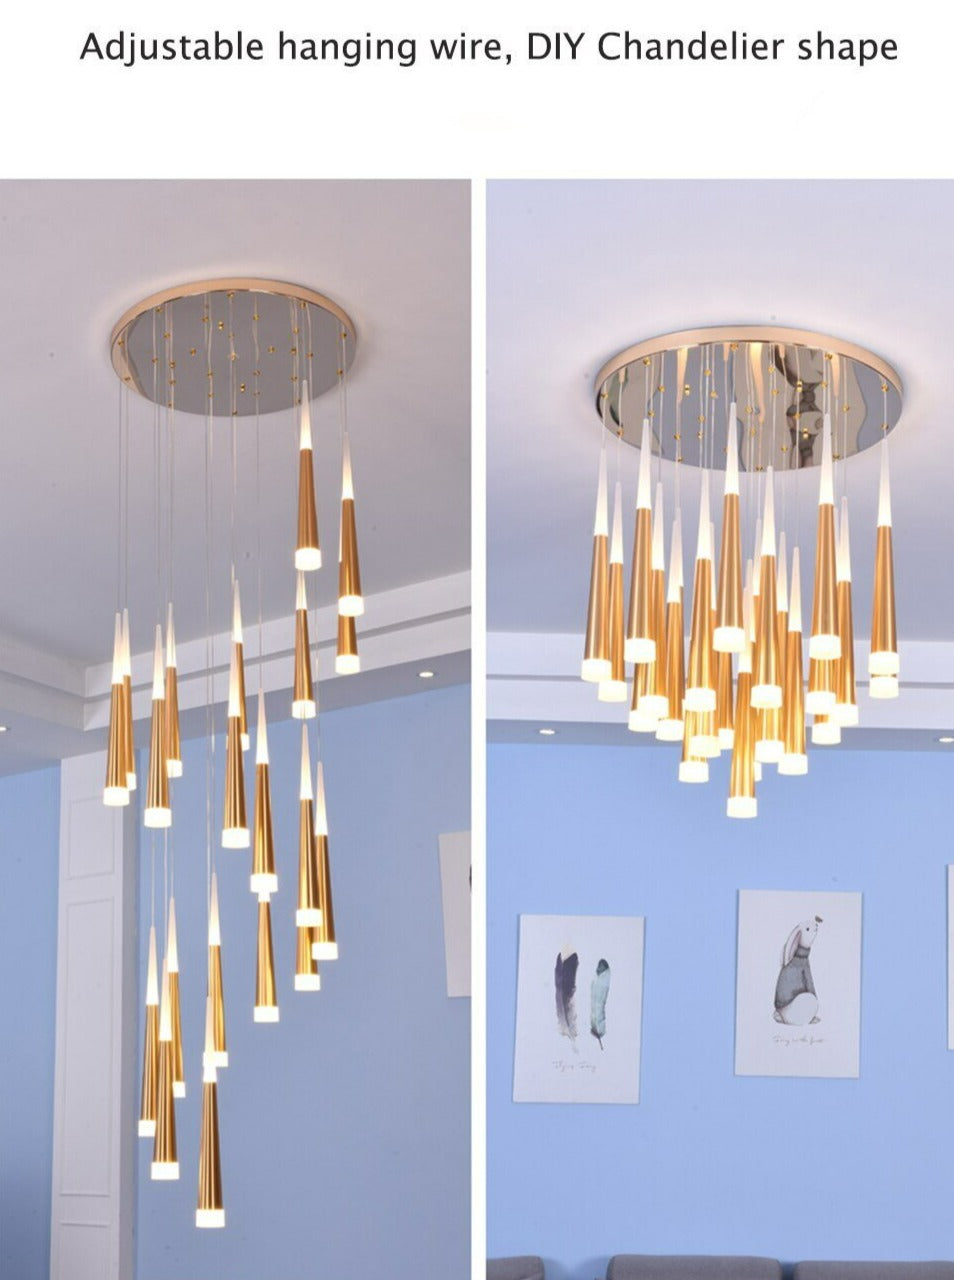 The Candle Chandelier